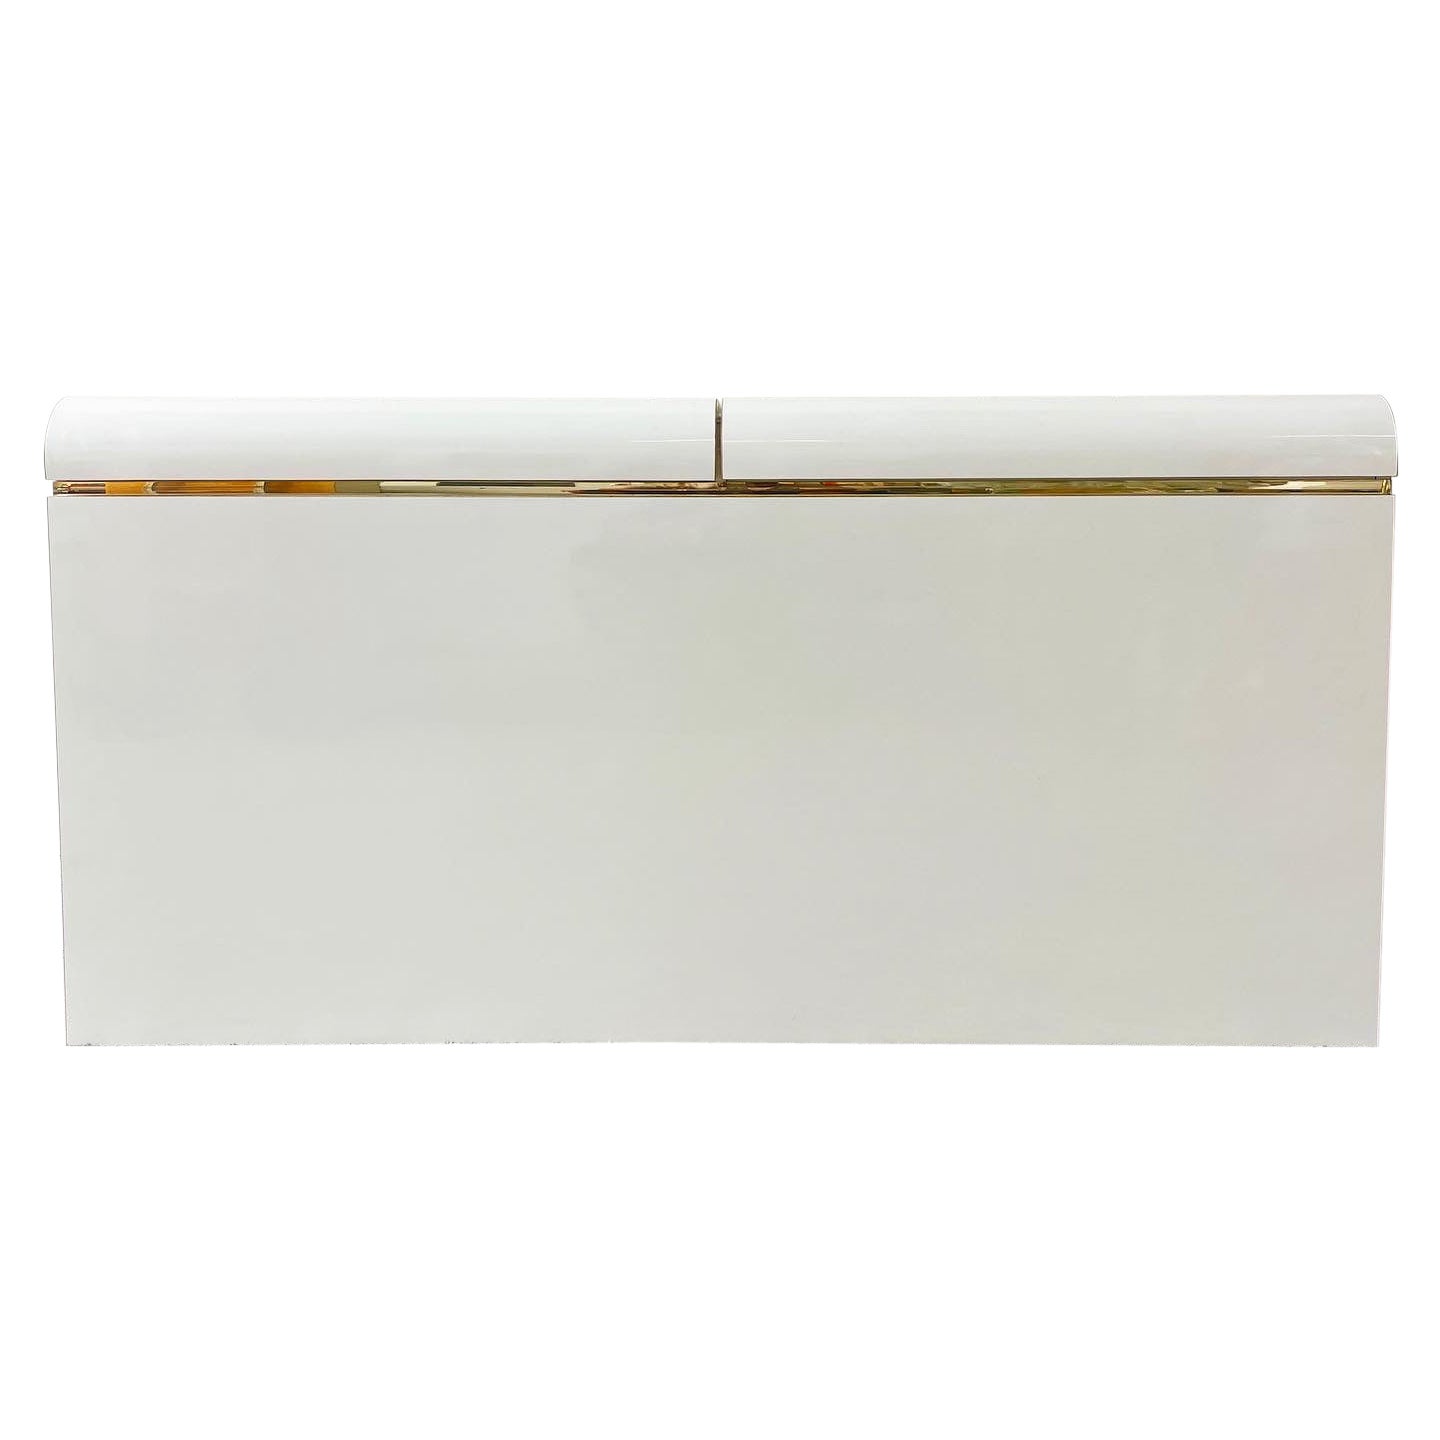 Postmodern Cream Lacquer Laminate Storage Waterfall Headboard with Gold Paneling